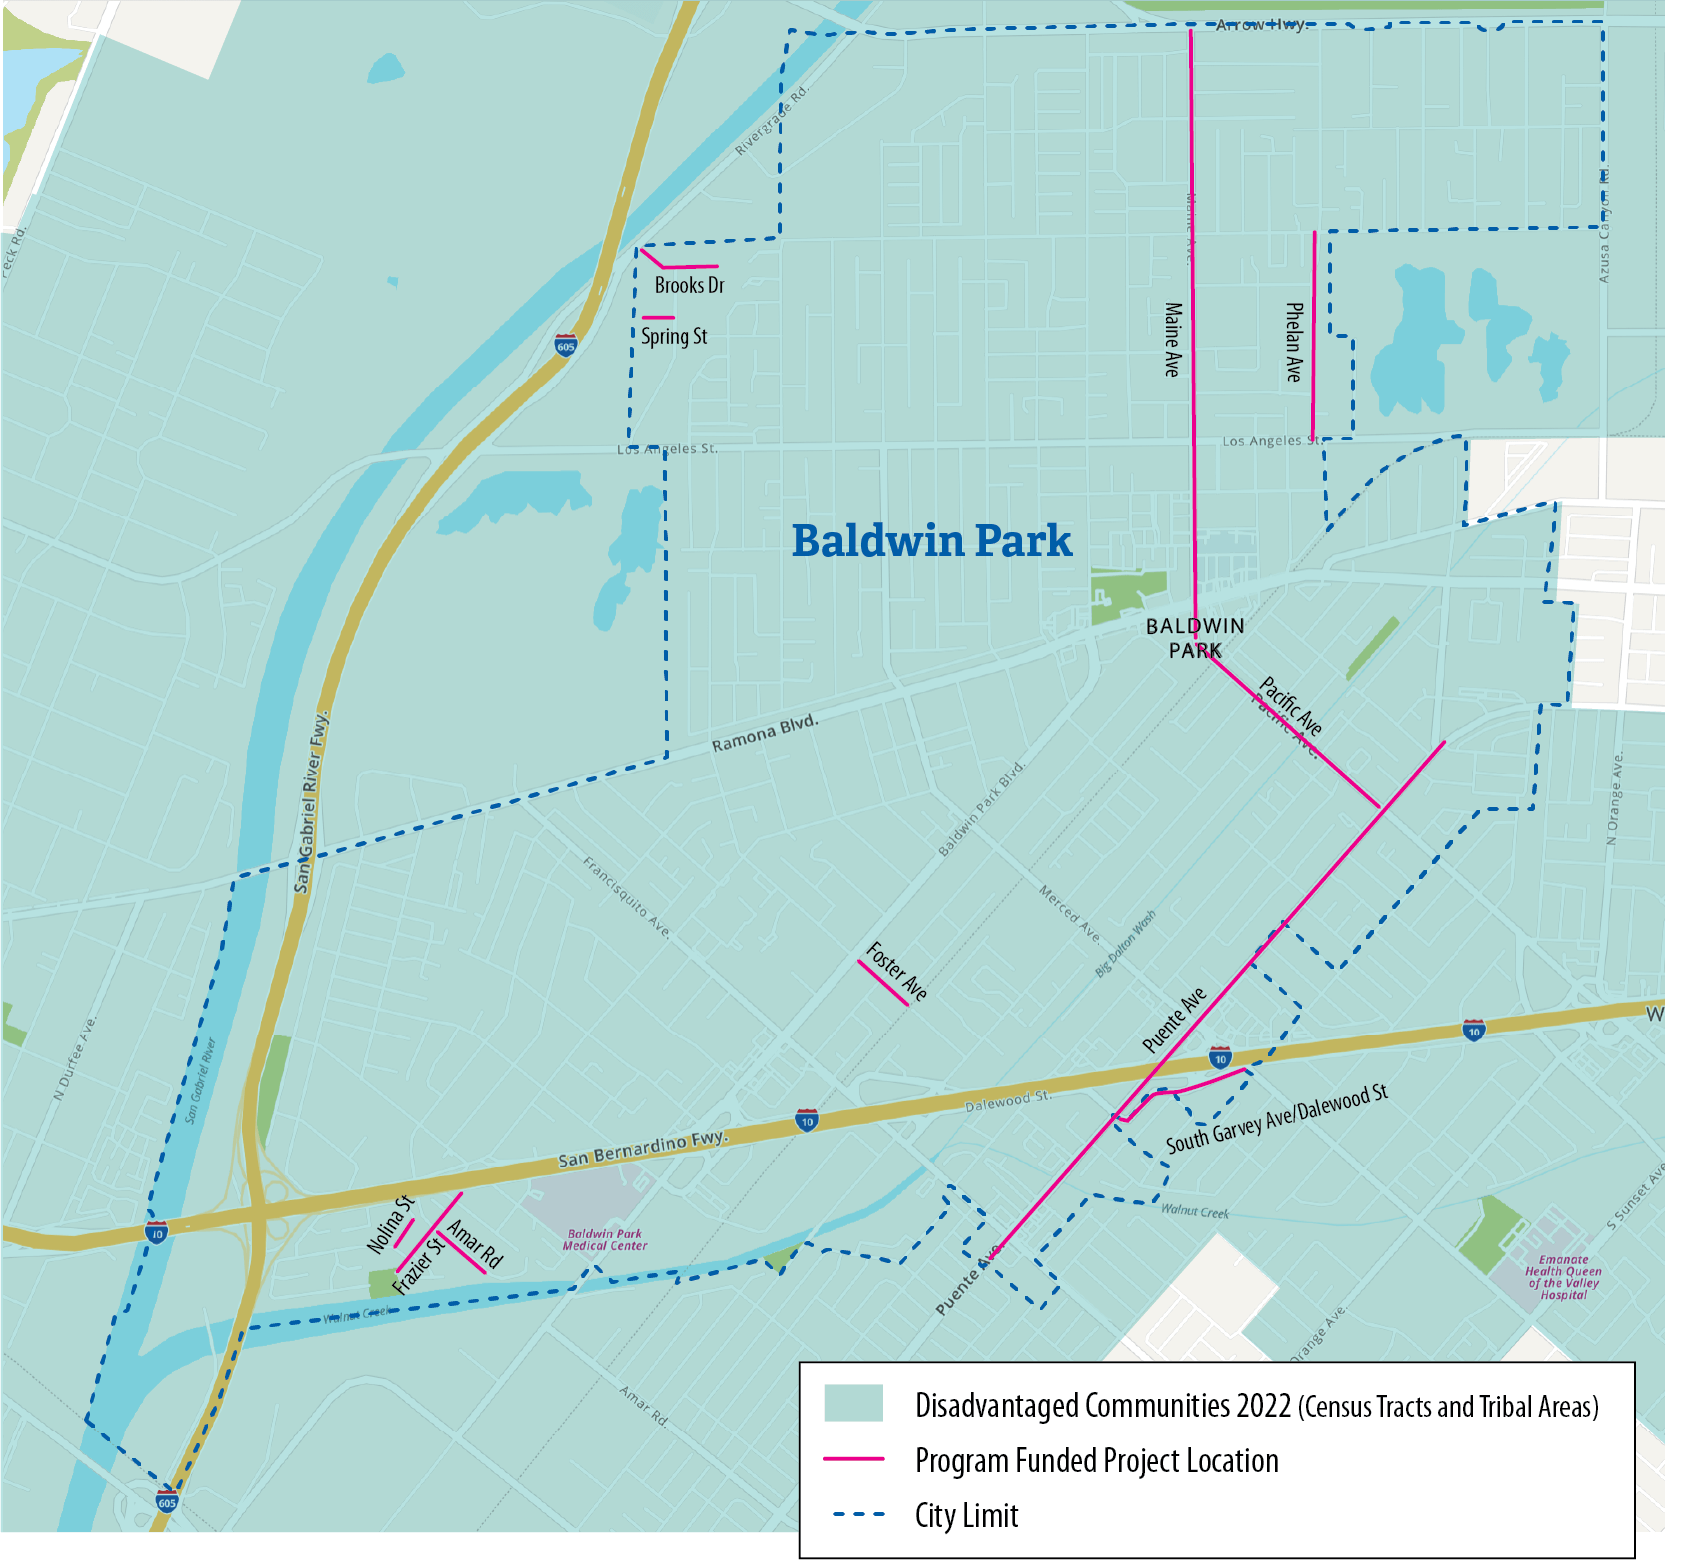 Figure A.1 shows a map of Baldwin Park and the location of Local Streets and Roads Program funded projects in relation to the disadvantaged communities within the City for fiscal years 2017-18 through 2021-22.